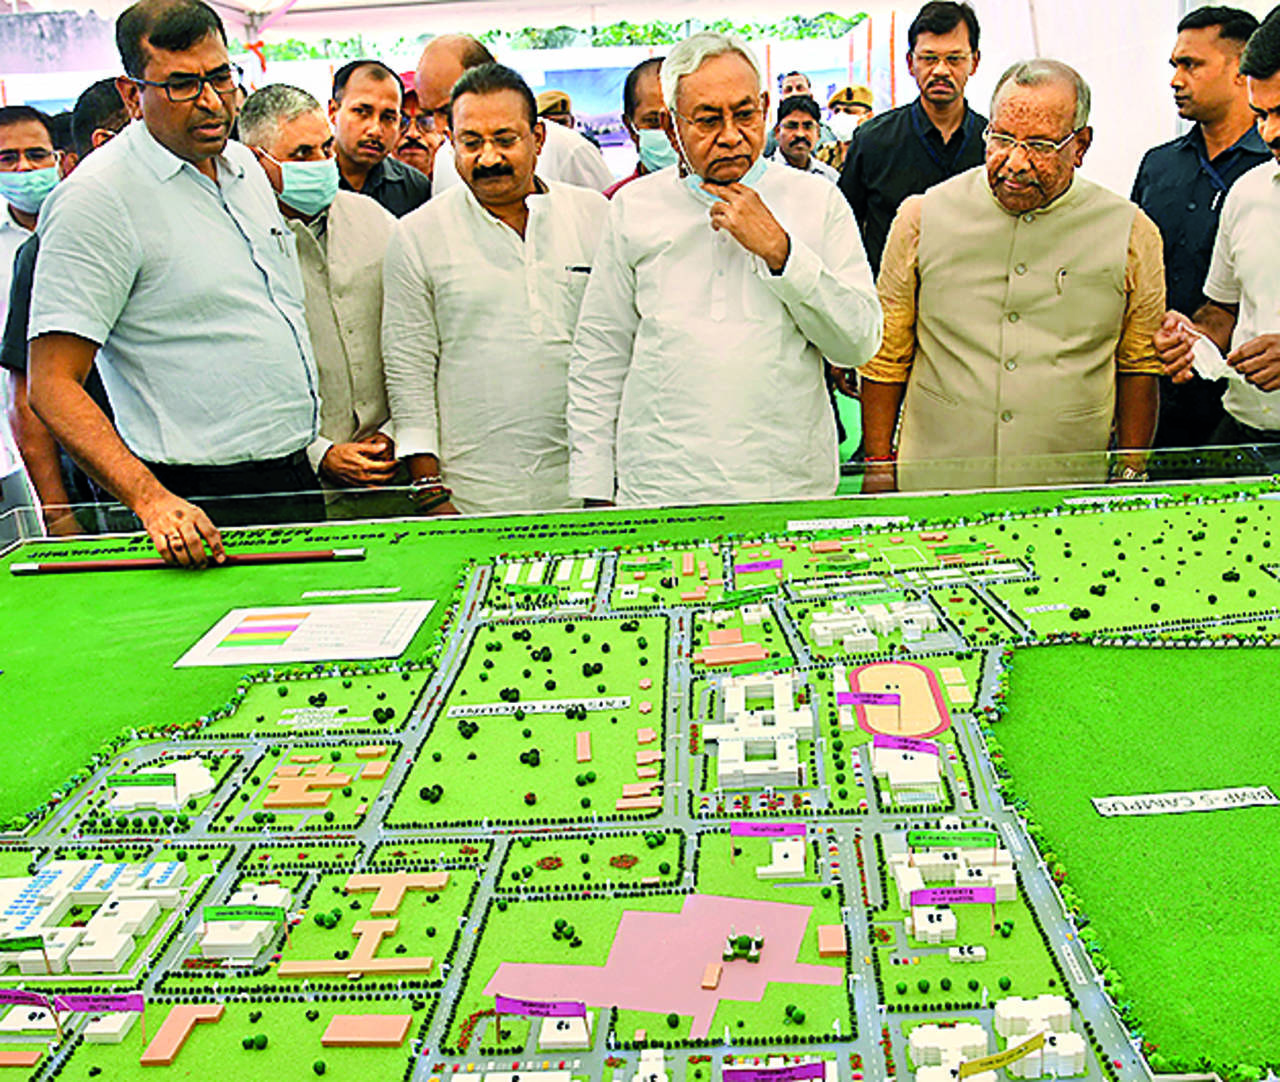 Cm: Construct Bldgs Of Animal Sciences Varsity Within Deadline | Patna News  - Times of India